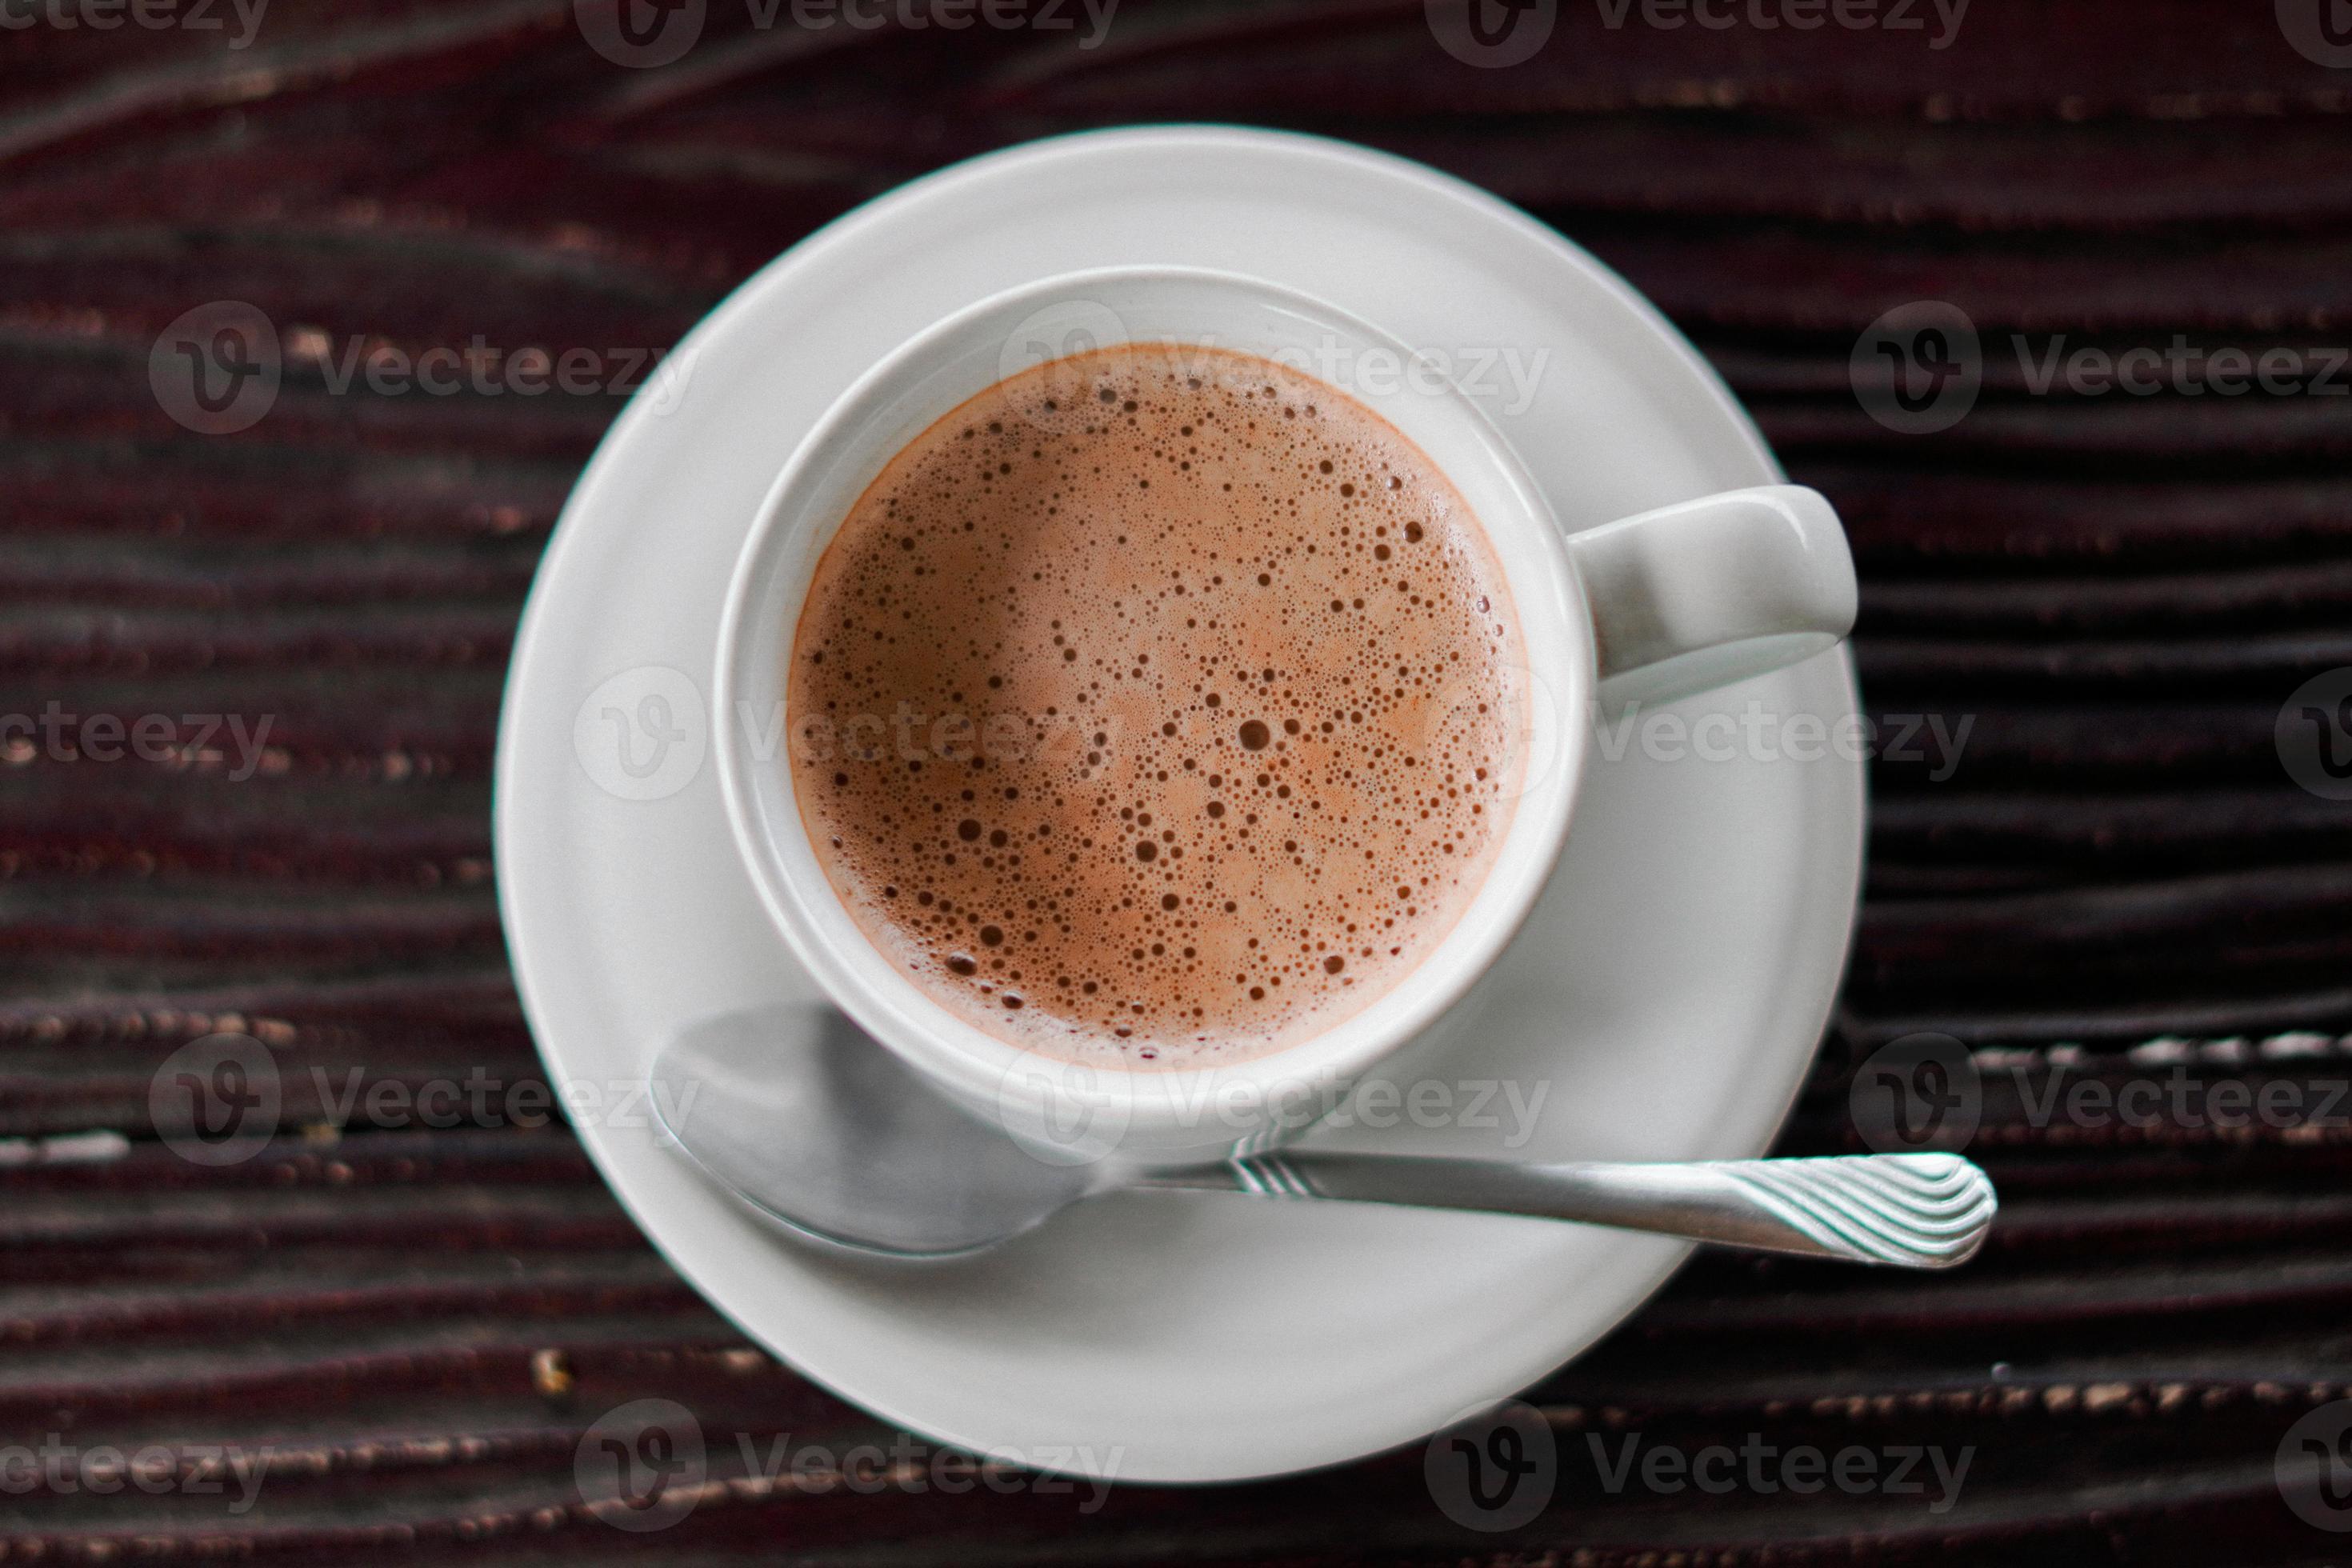 https://static.vecteezy.com/system/resources/previews/008/140/375/large_2x/aesthetic-a-cup-of-coffee-on-wooden-background-photo.jpg